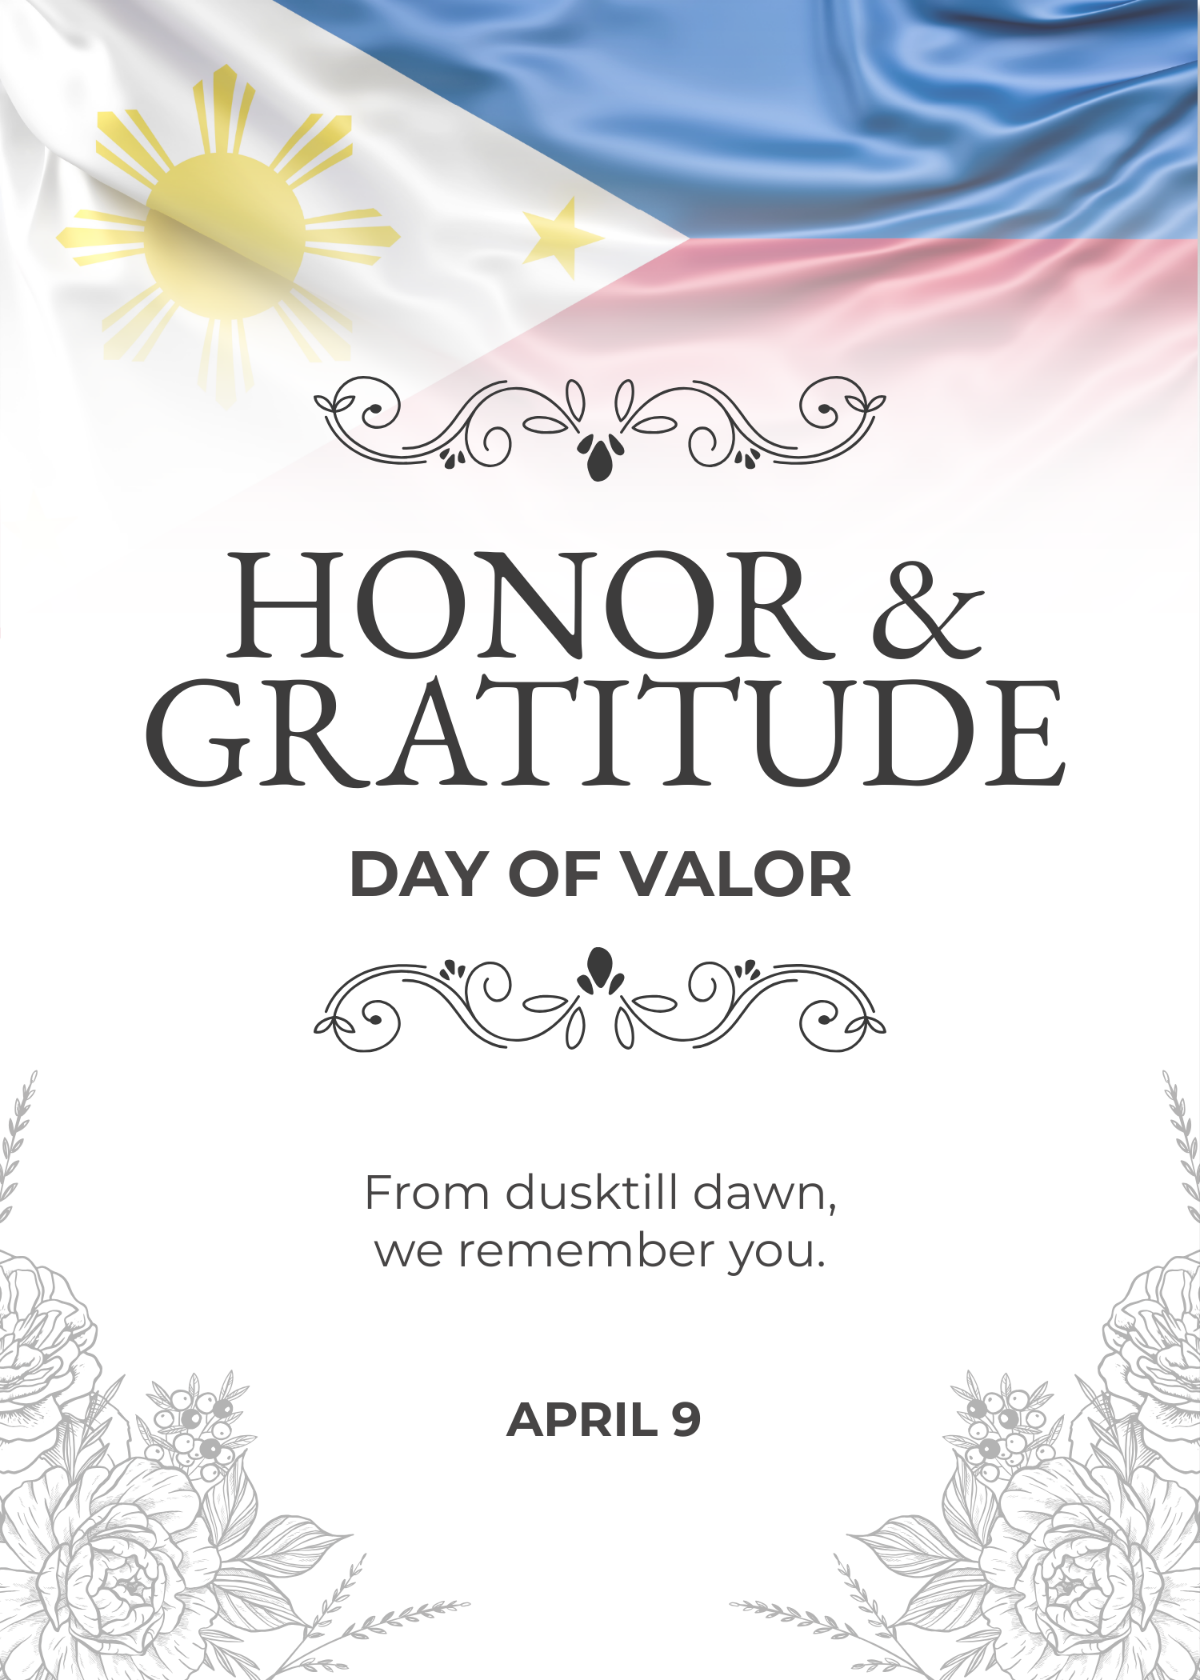  Day of Valor  Greeting Card Template